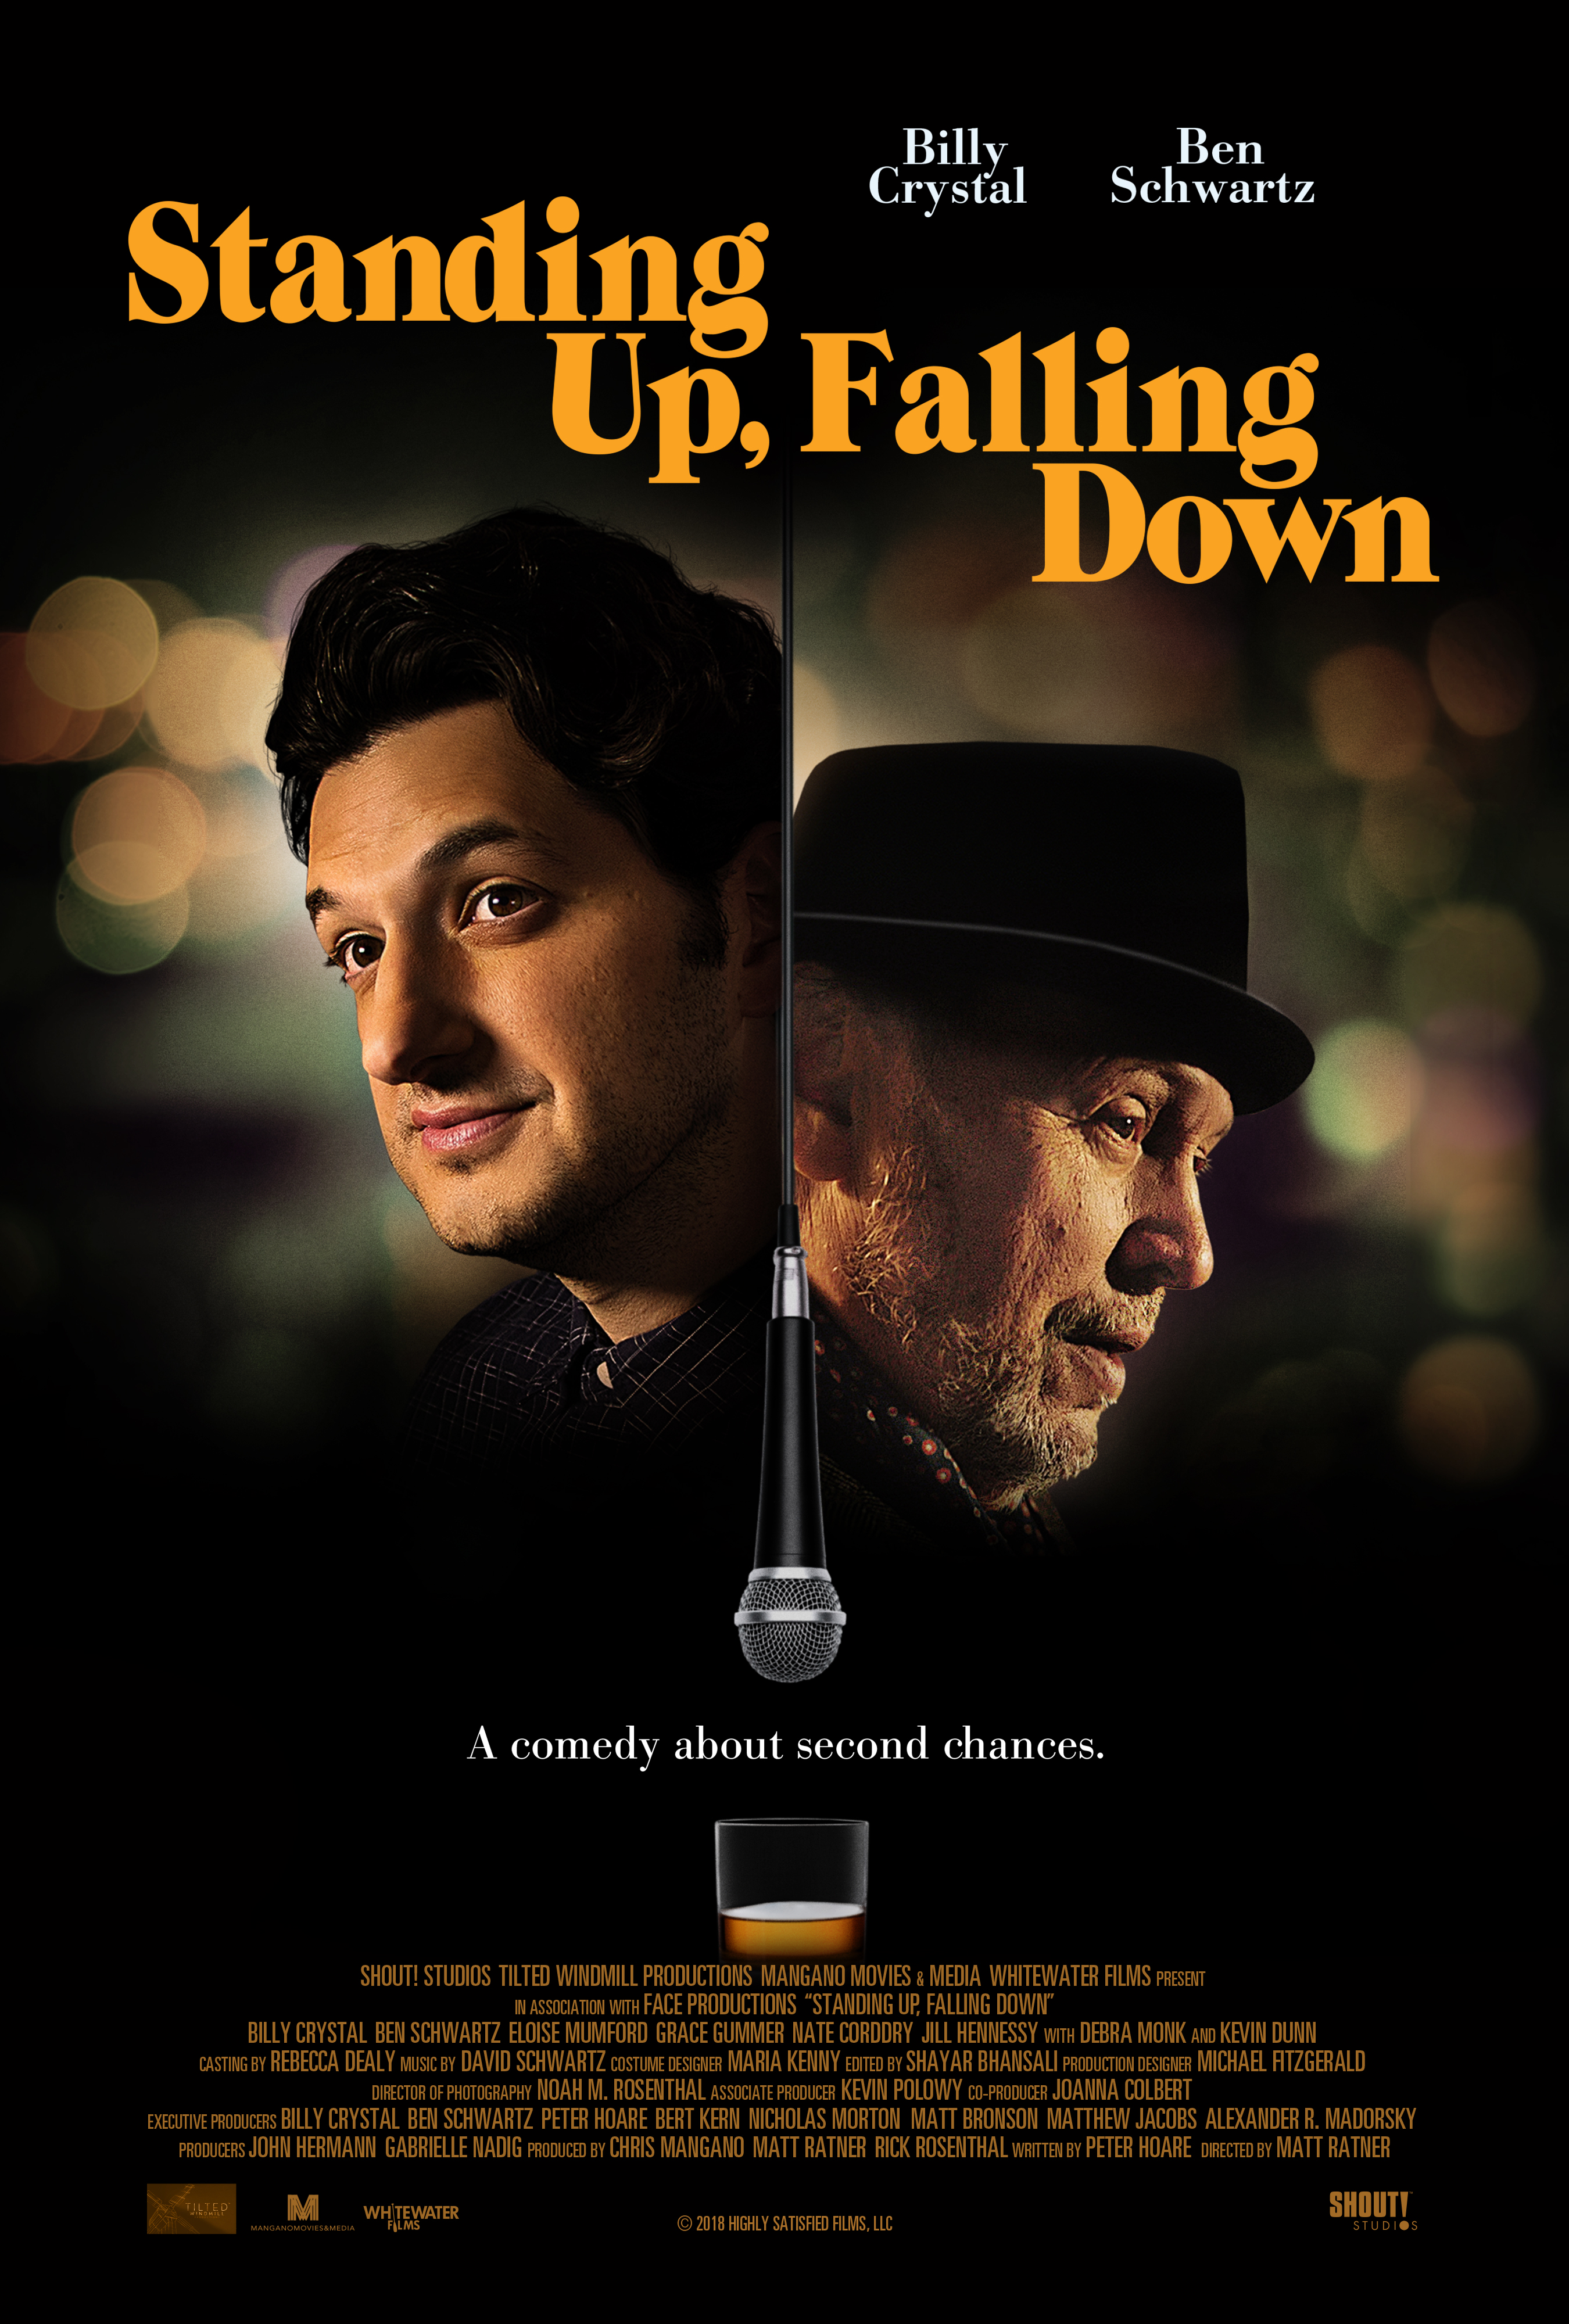 Standing Up, Falling Down film poster